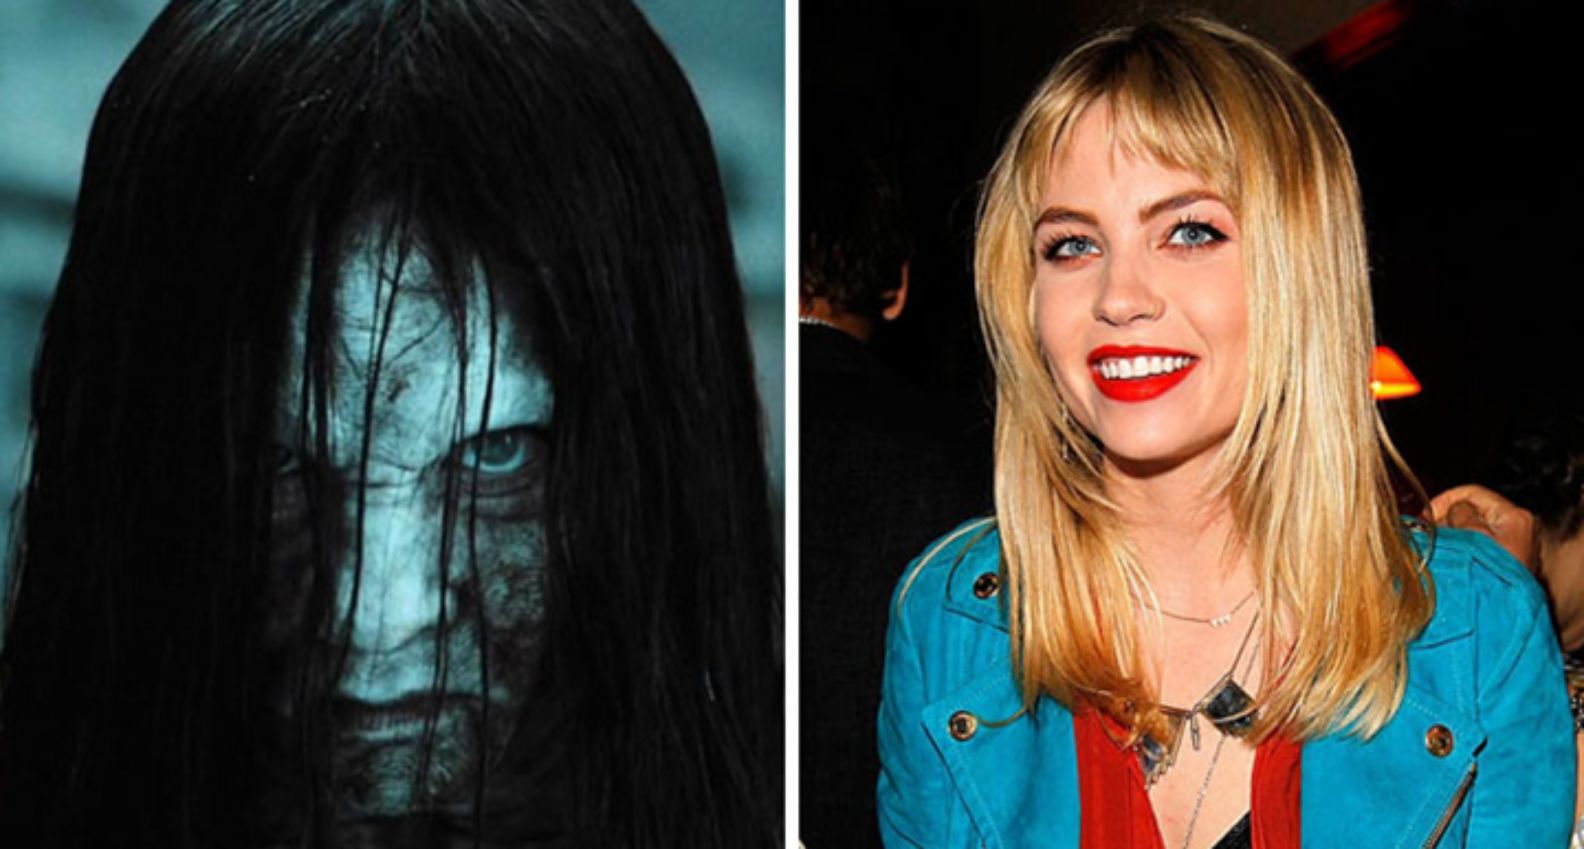 horror movie actors, what do they look like without makeup?